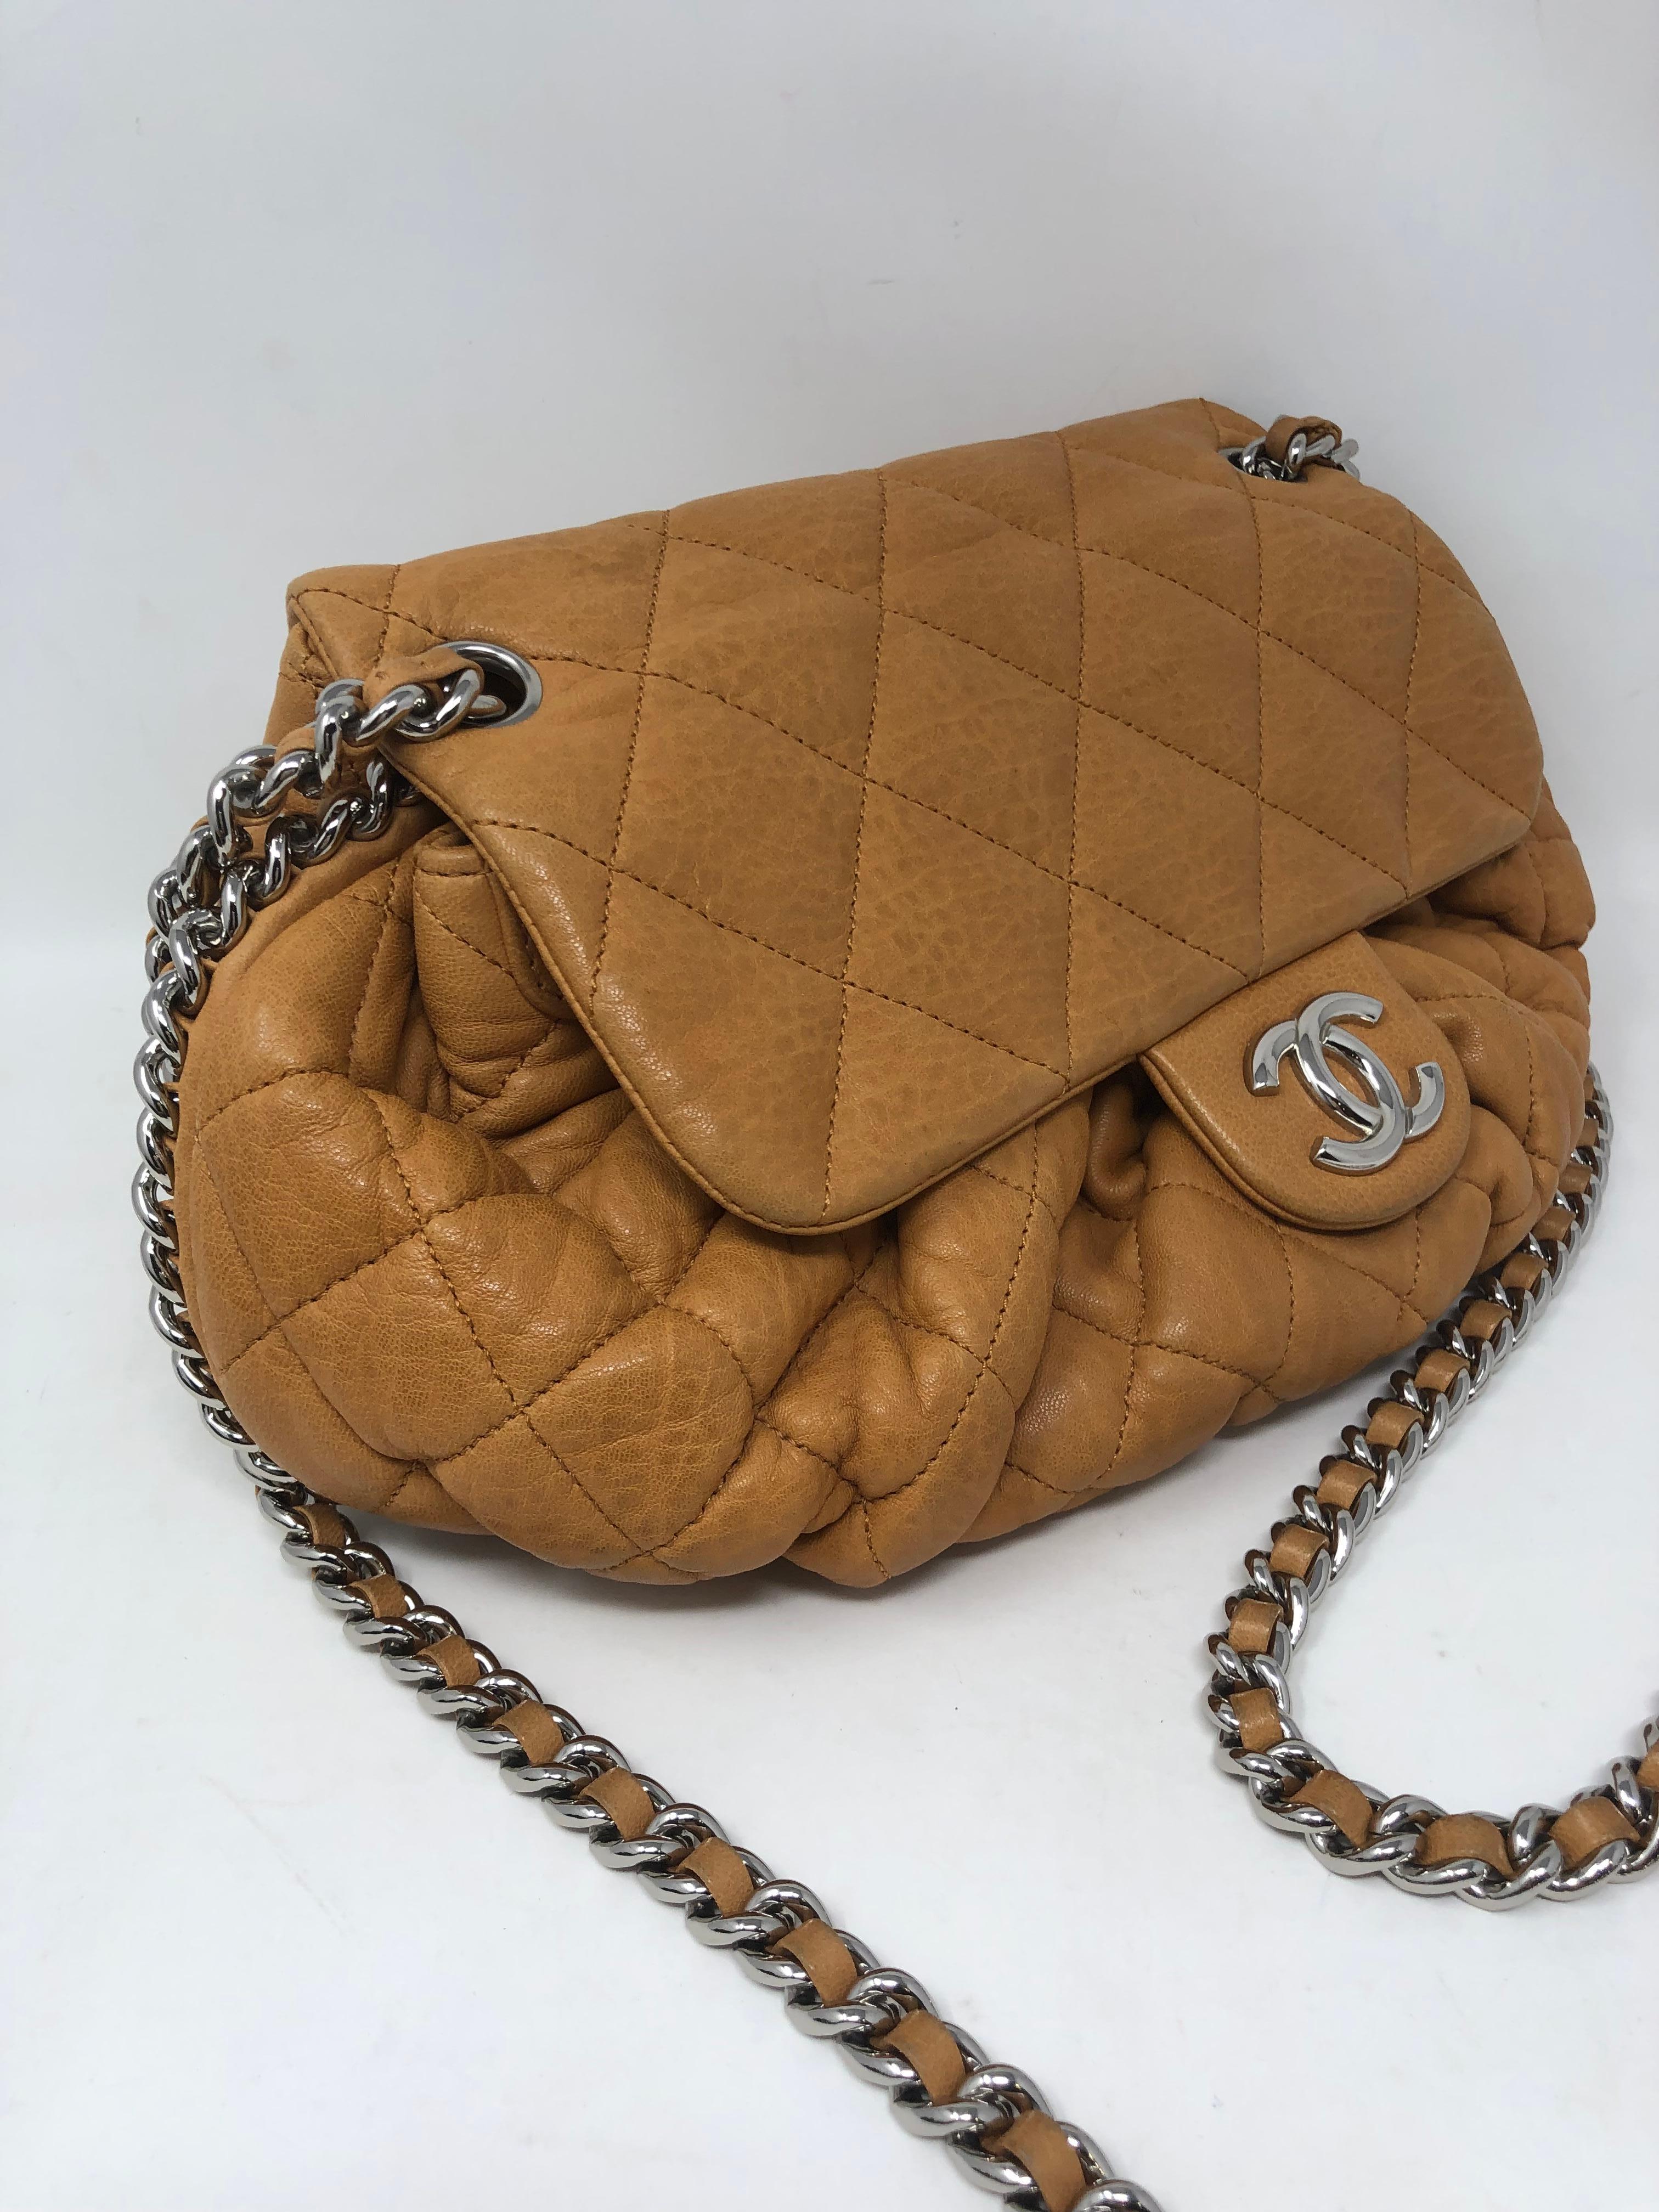 Chanel Tan Chain Around Bag. Nice butterscotch tan color leather in good condition. Silver chain around and hardware.  Medium size crossbody. Chain can be doubled to make shorter. Interior clean. Guaranteed authentic.  